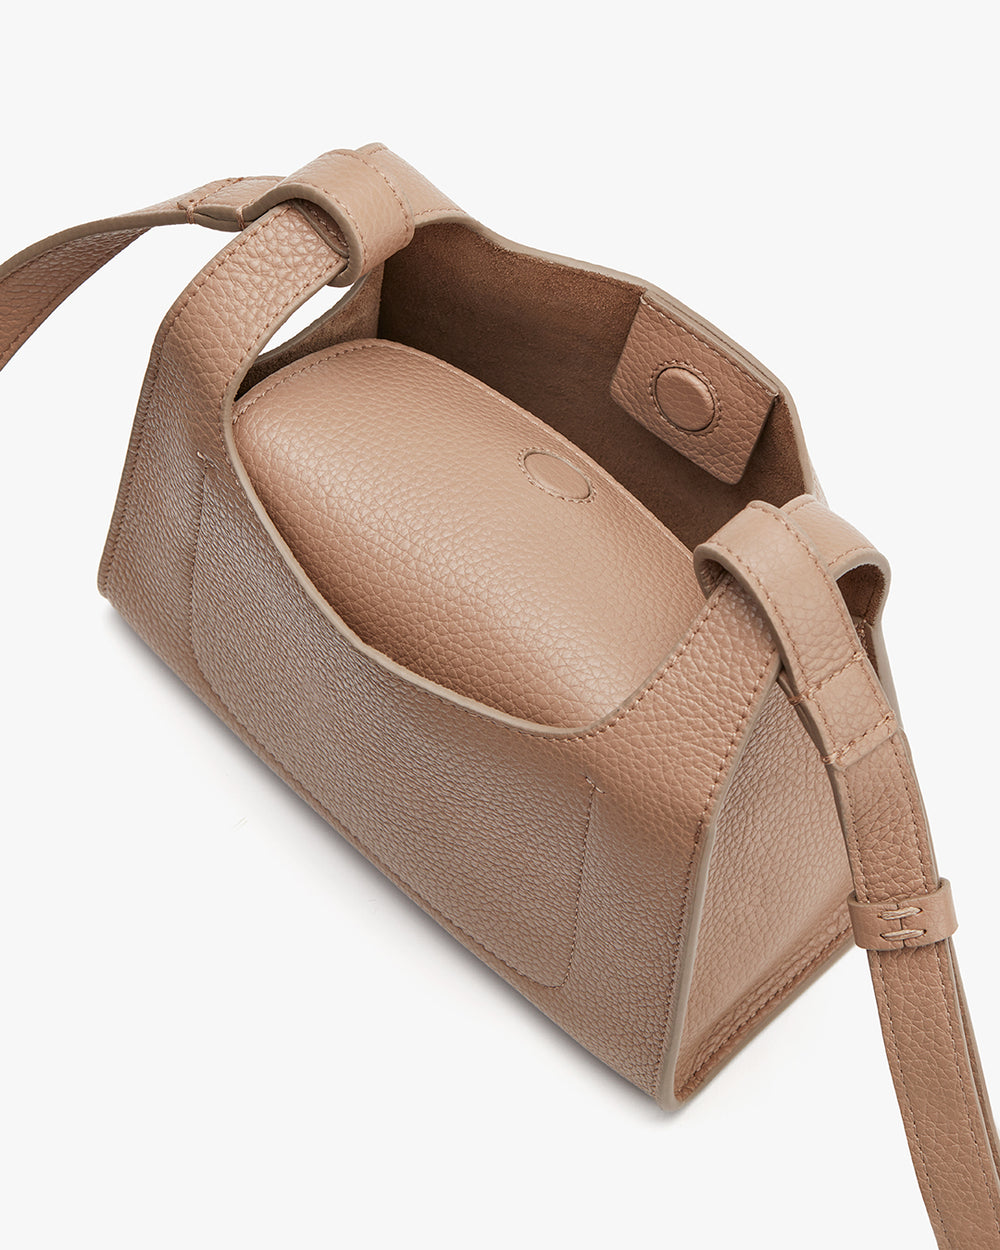 Open handbag with interior visible and strap attached.